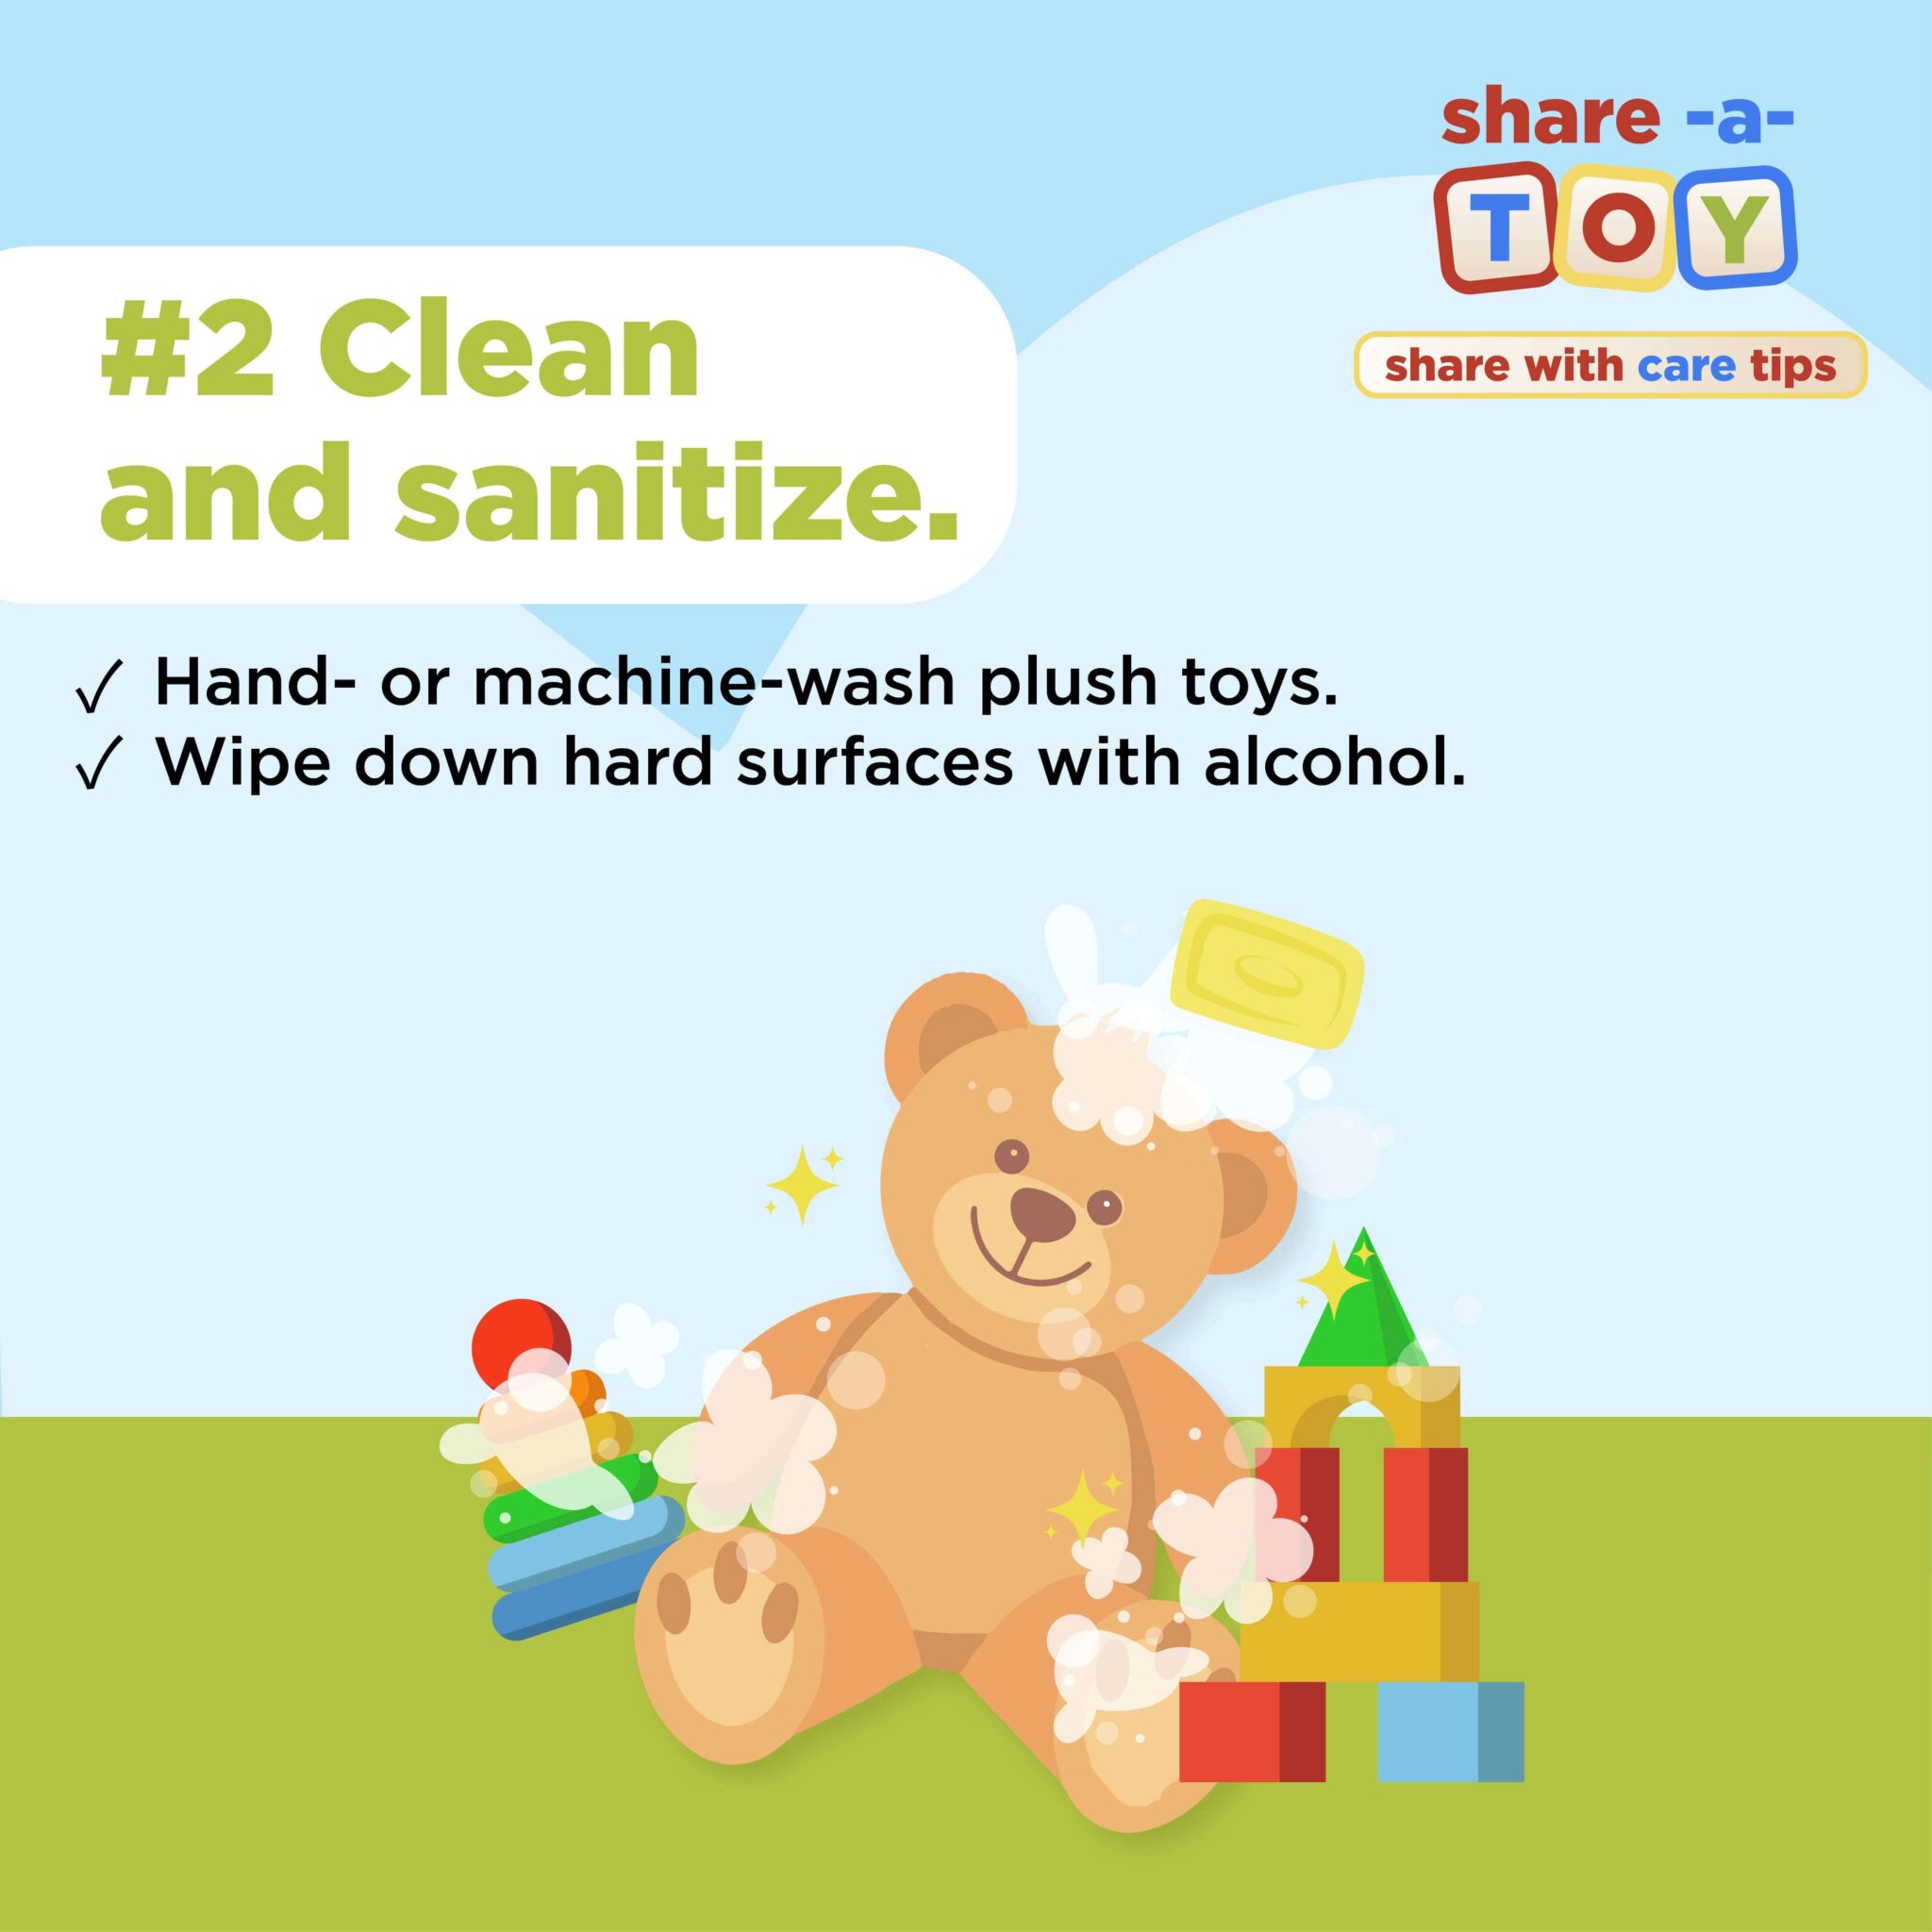 Share A Toy with Care Tips - Clean and sanitize